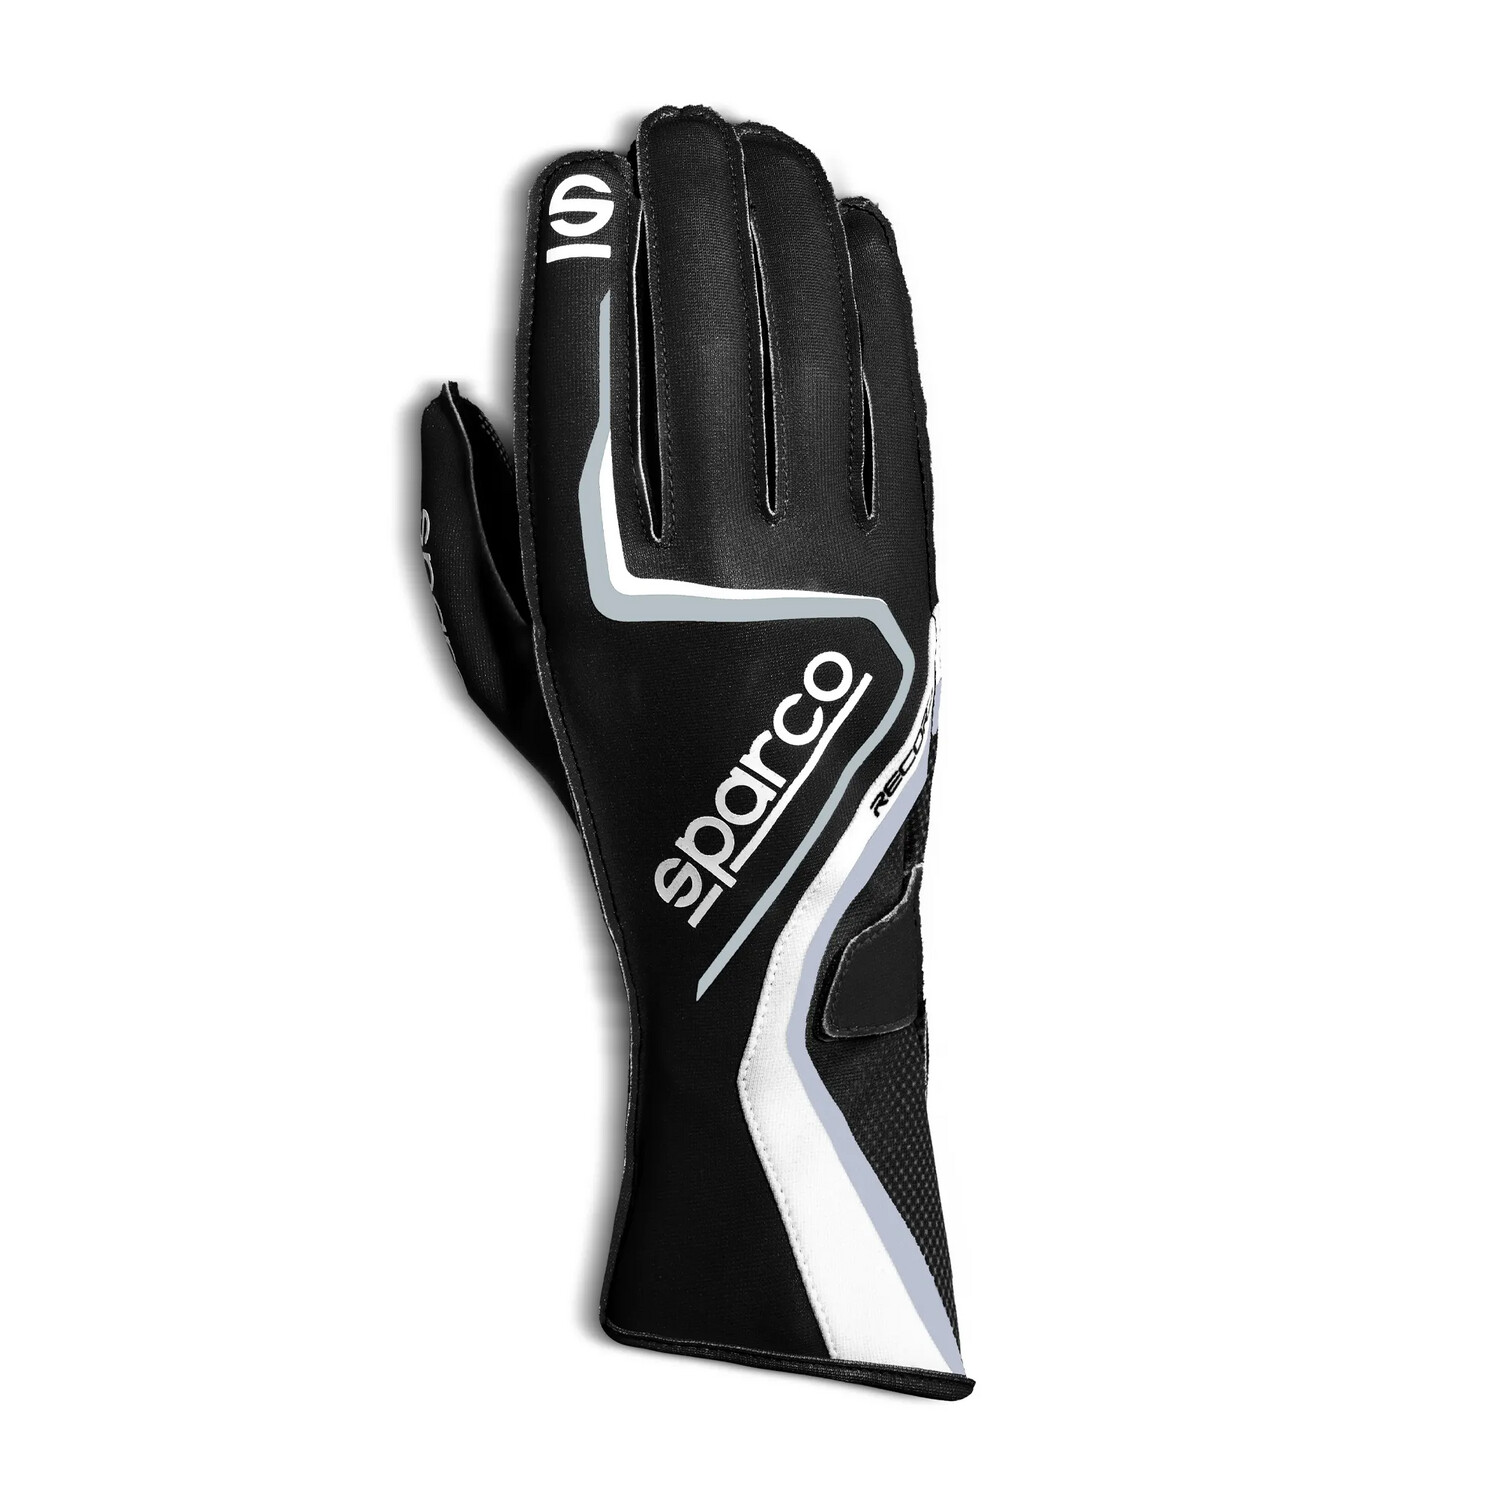 Sparco Record gloves